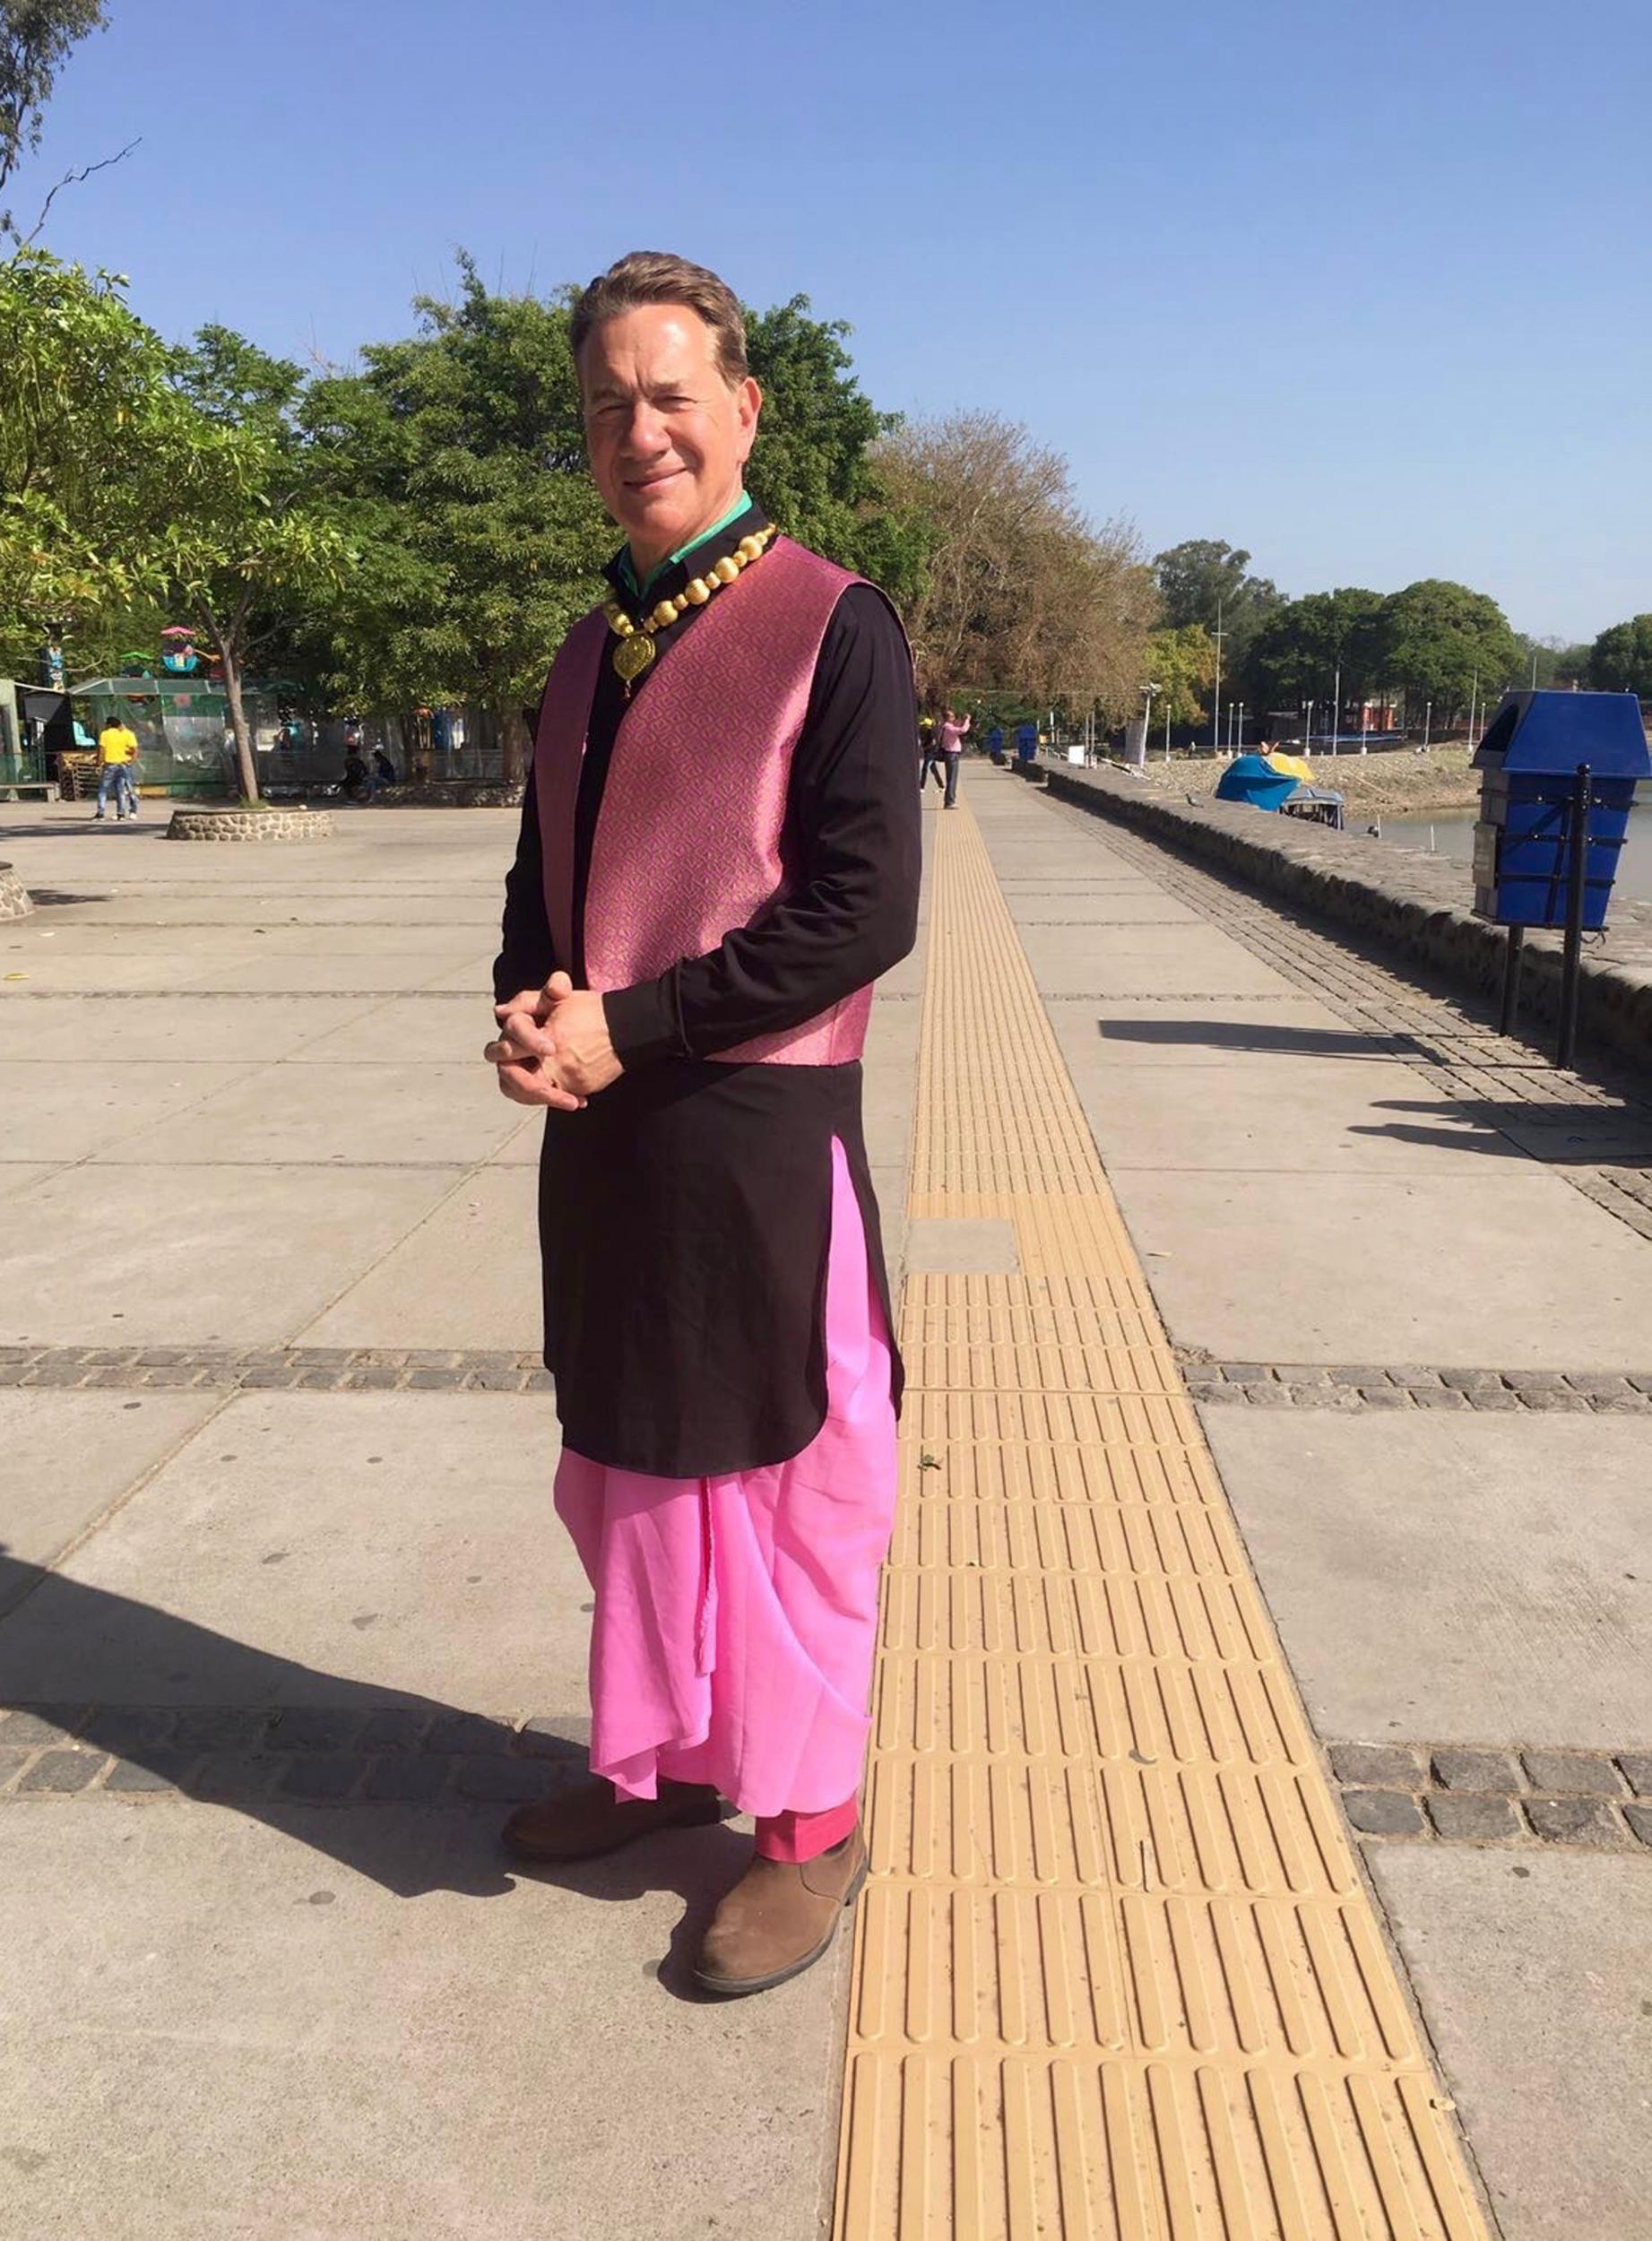 Passage to India: Michael Portillo is back with more travelogues